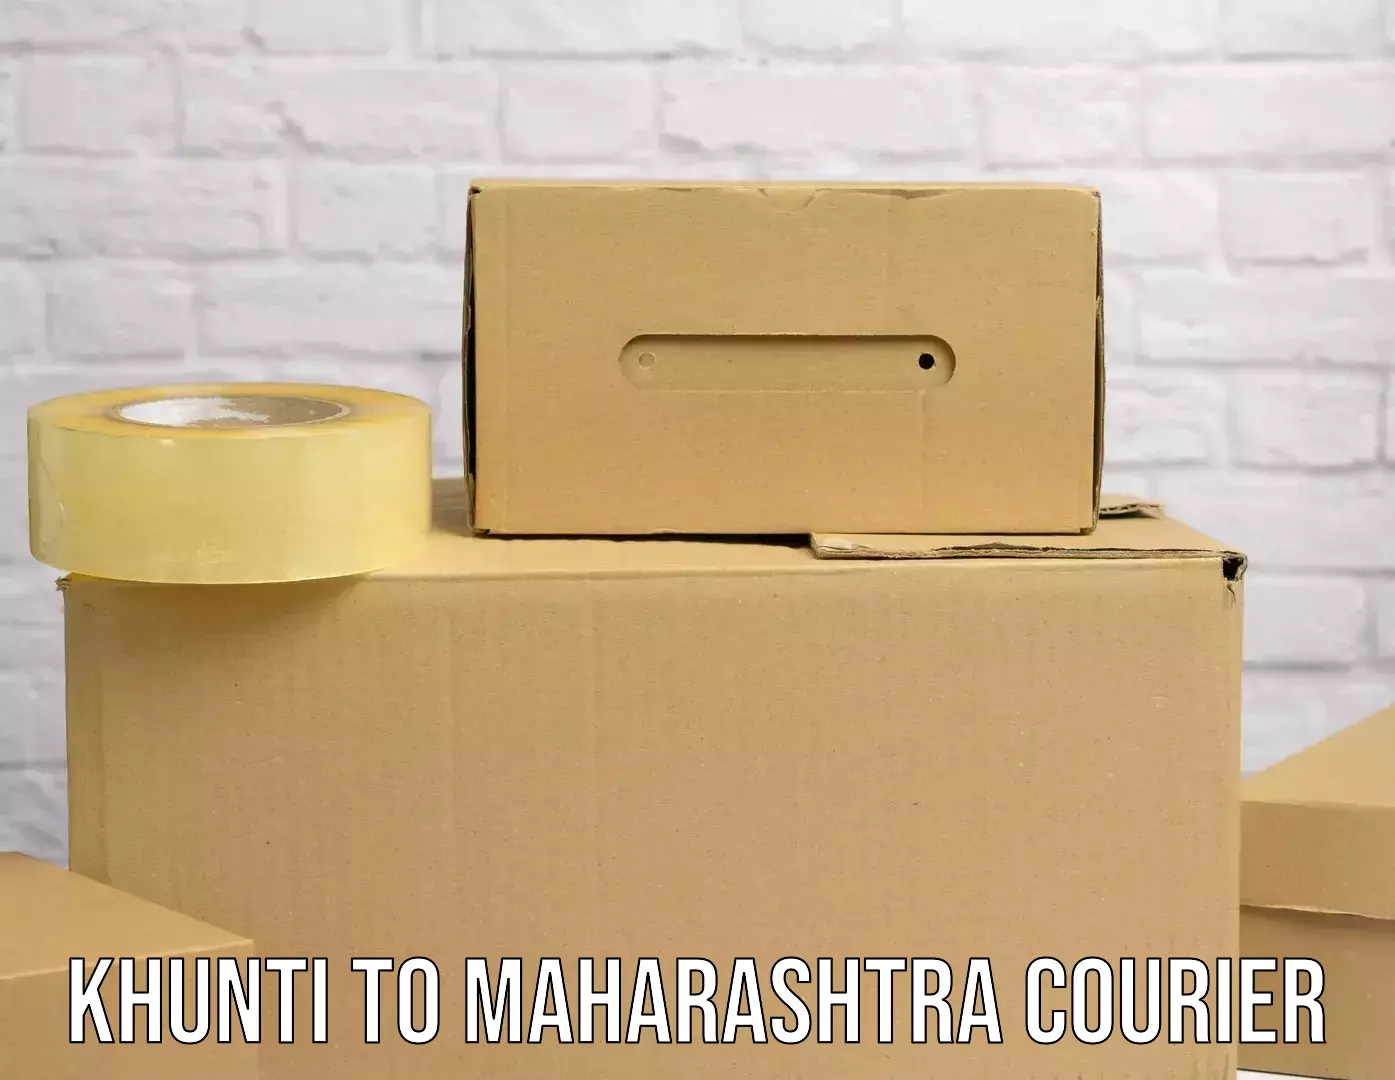 Business delivery service Khunti to Maharashtra